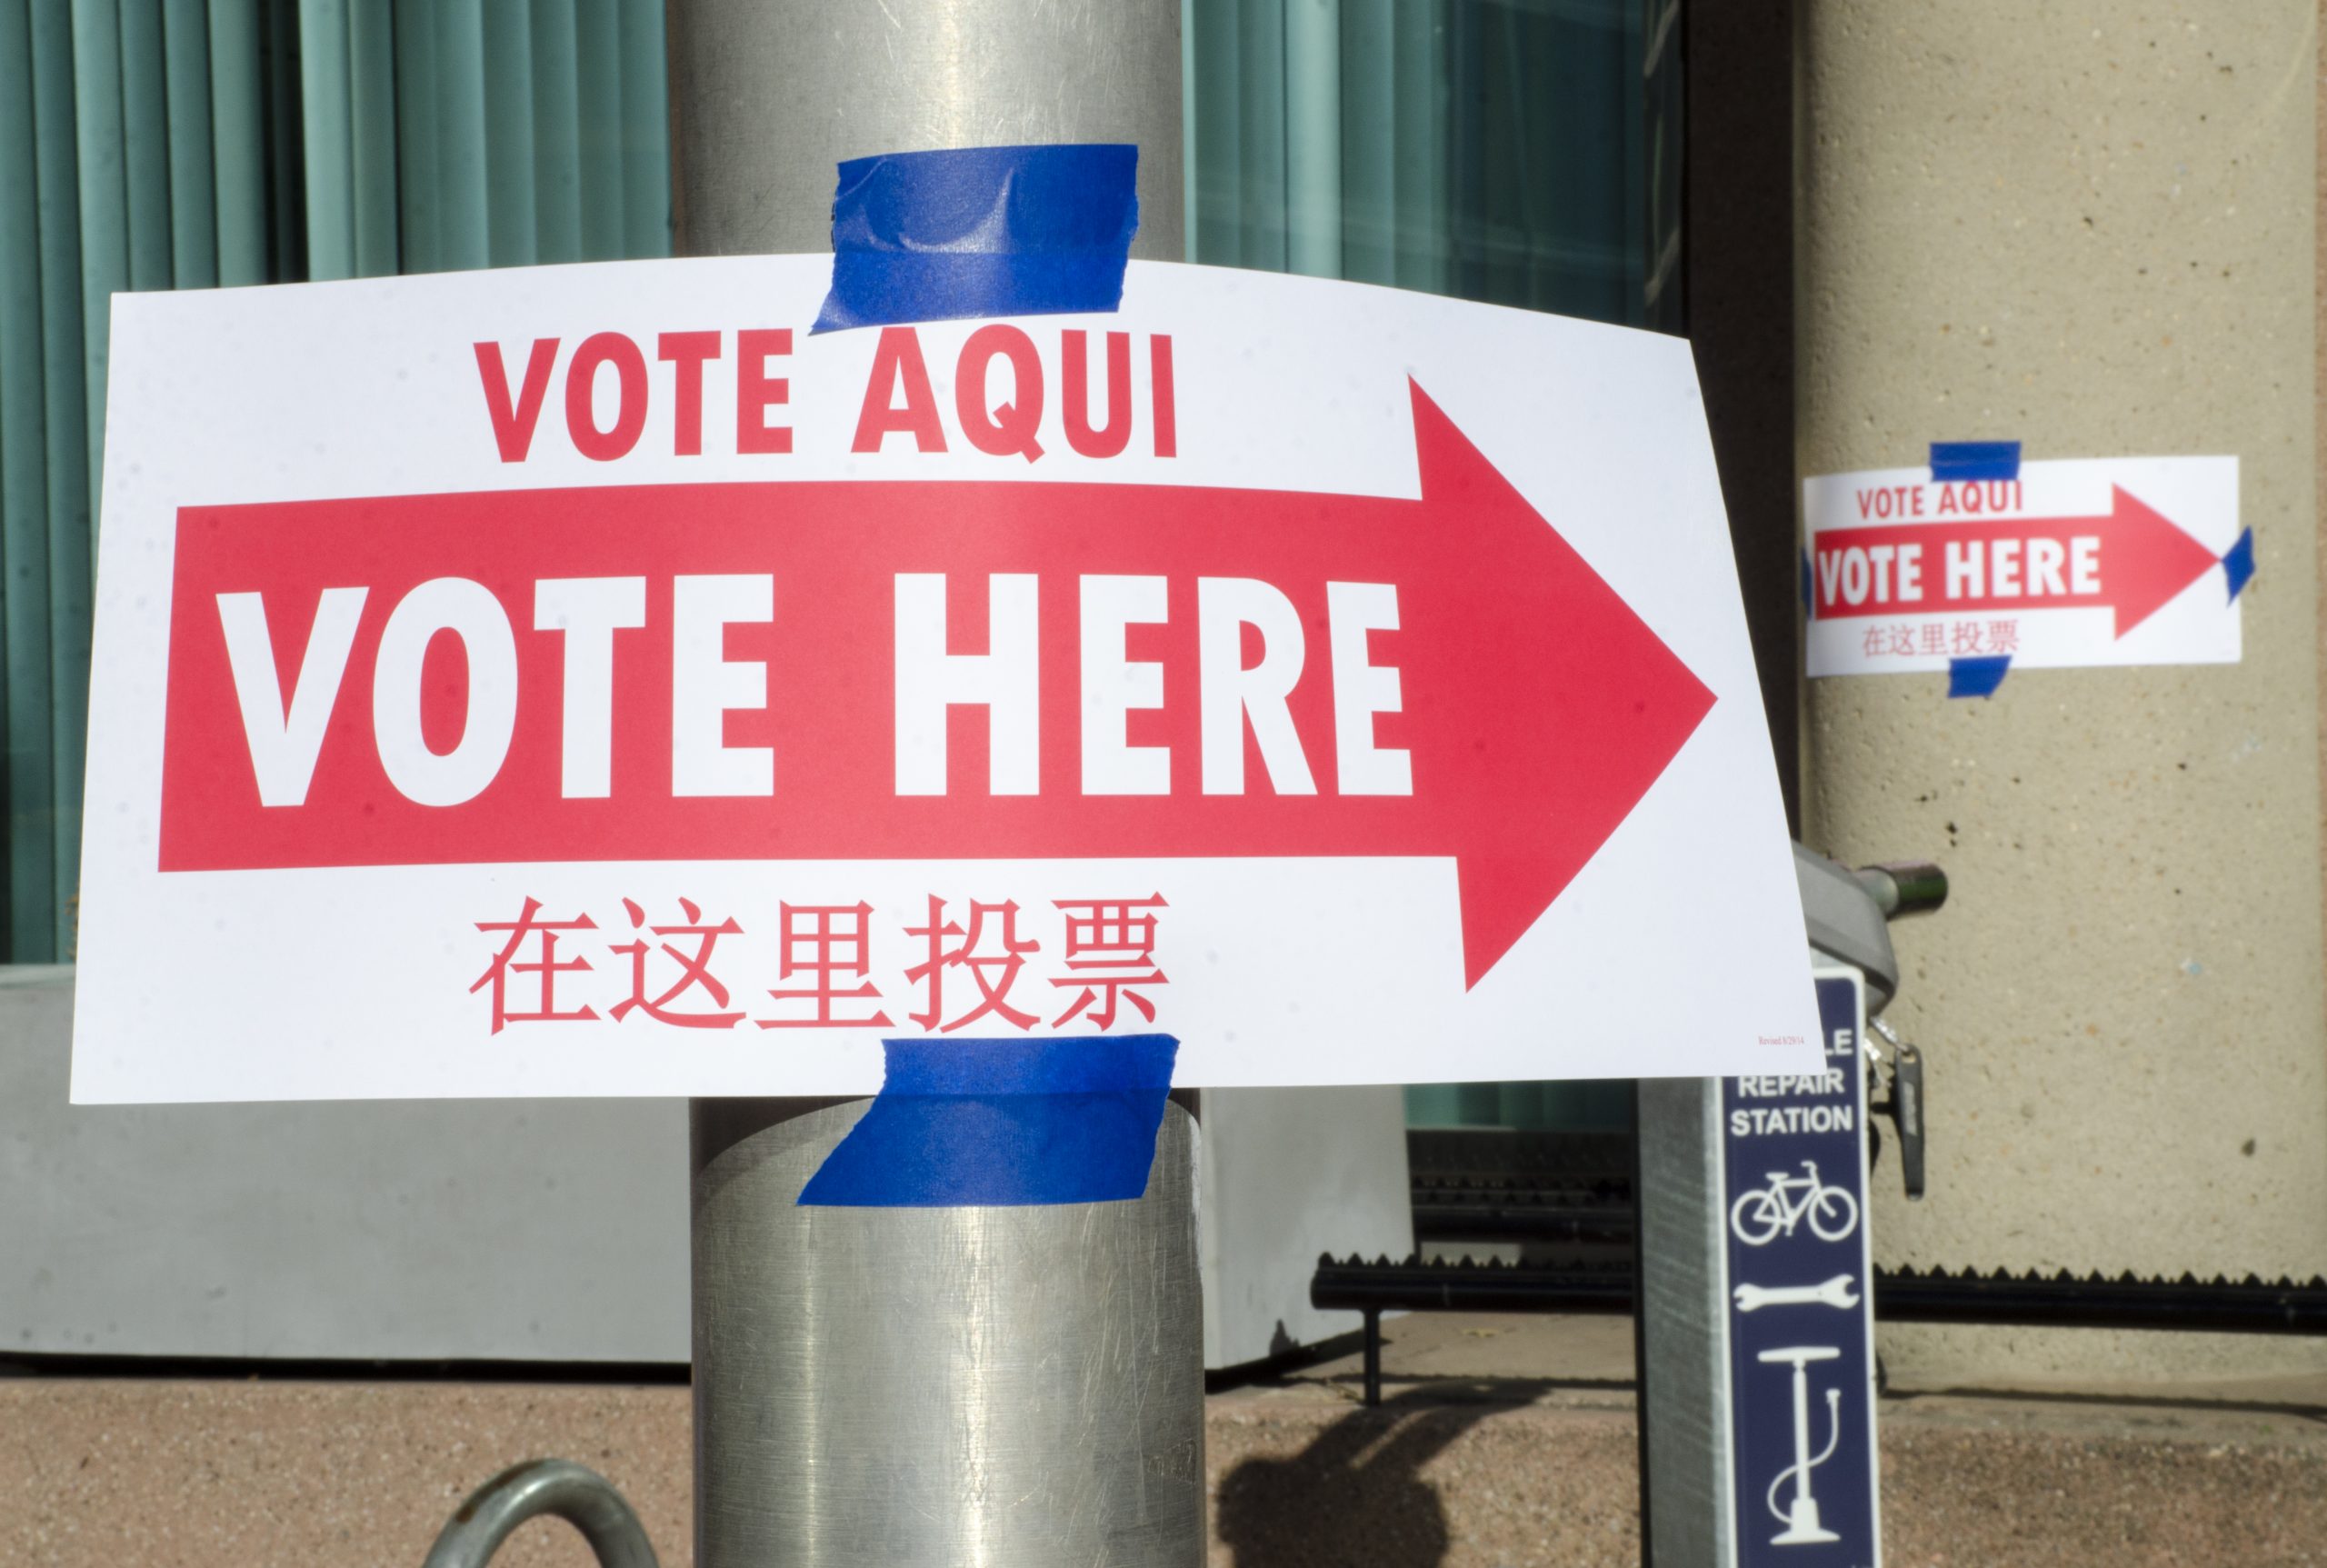 Voting signs in Spanish, English, and Chinese show the way to the polling station.